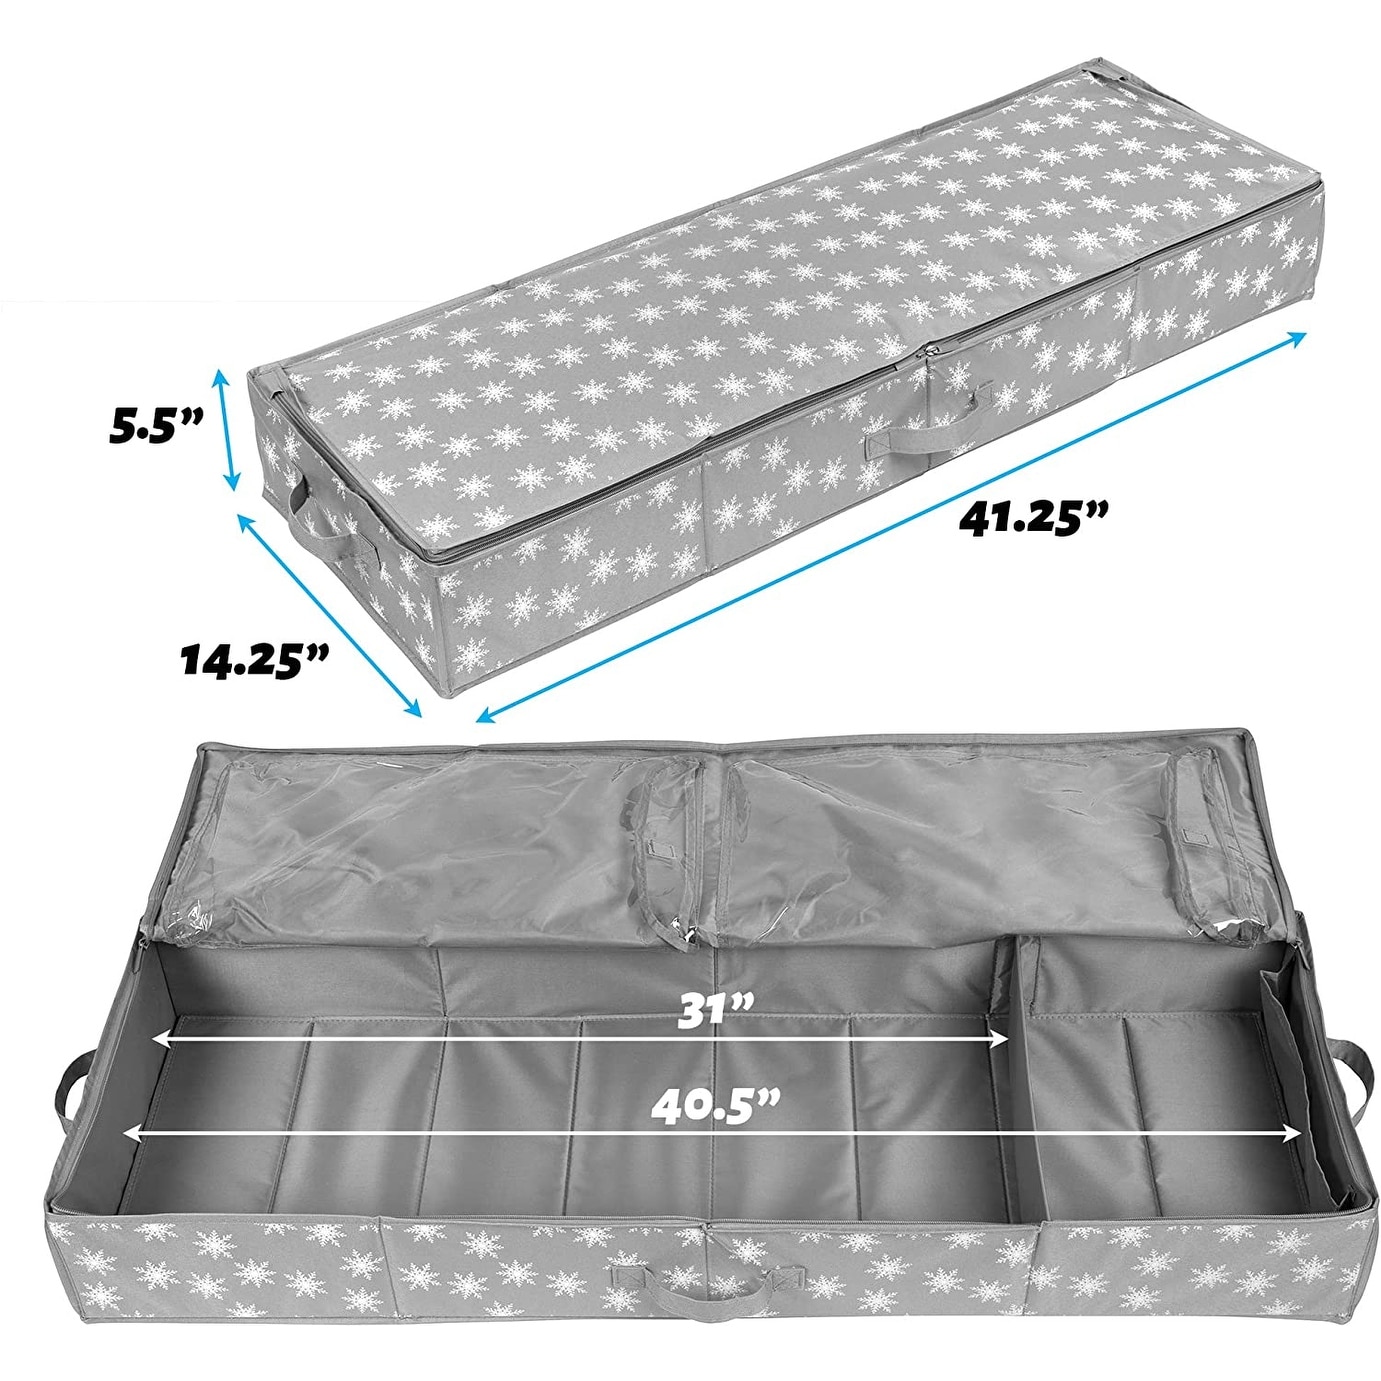 Gift Wrap Organizer and Storage Box Holds 24 Rolls-Red Stars - Bed Bath &  Beyond - 32570382